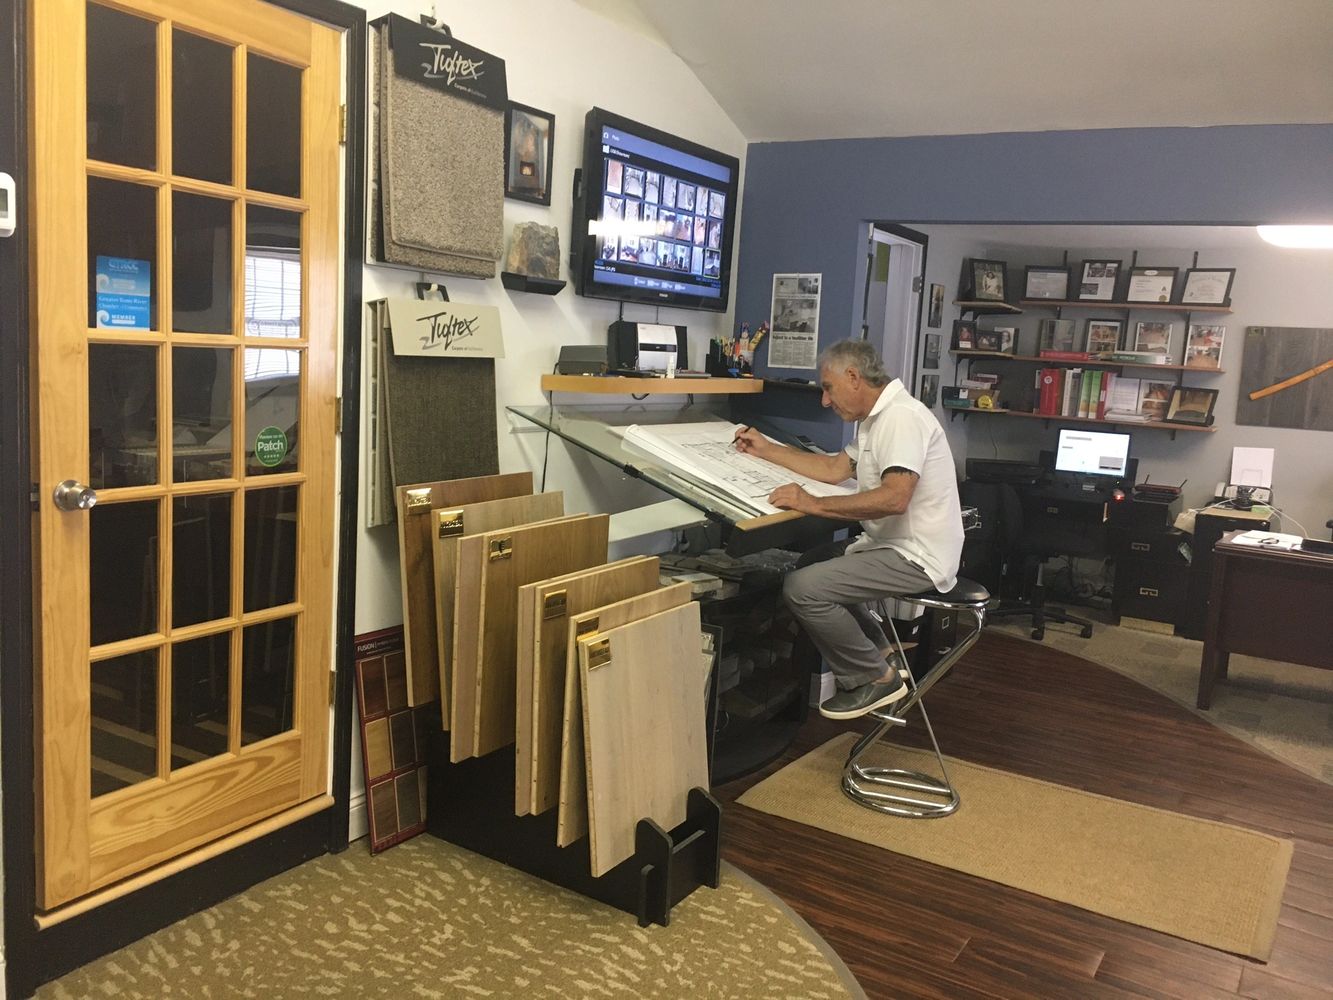 Frank Conzola working on a customer's flooring design at his drafting table in his office-showroom.